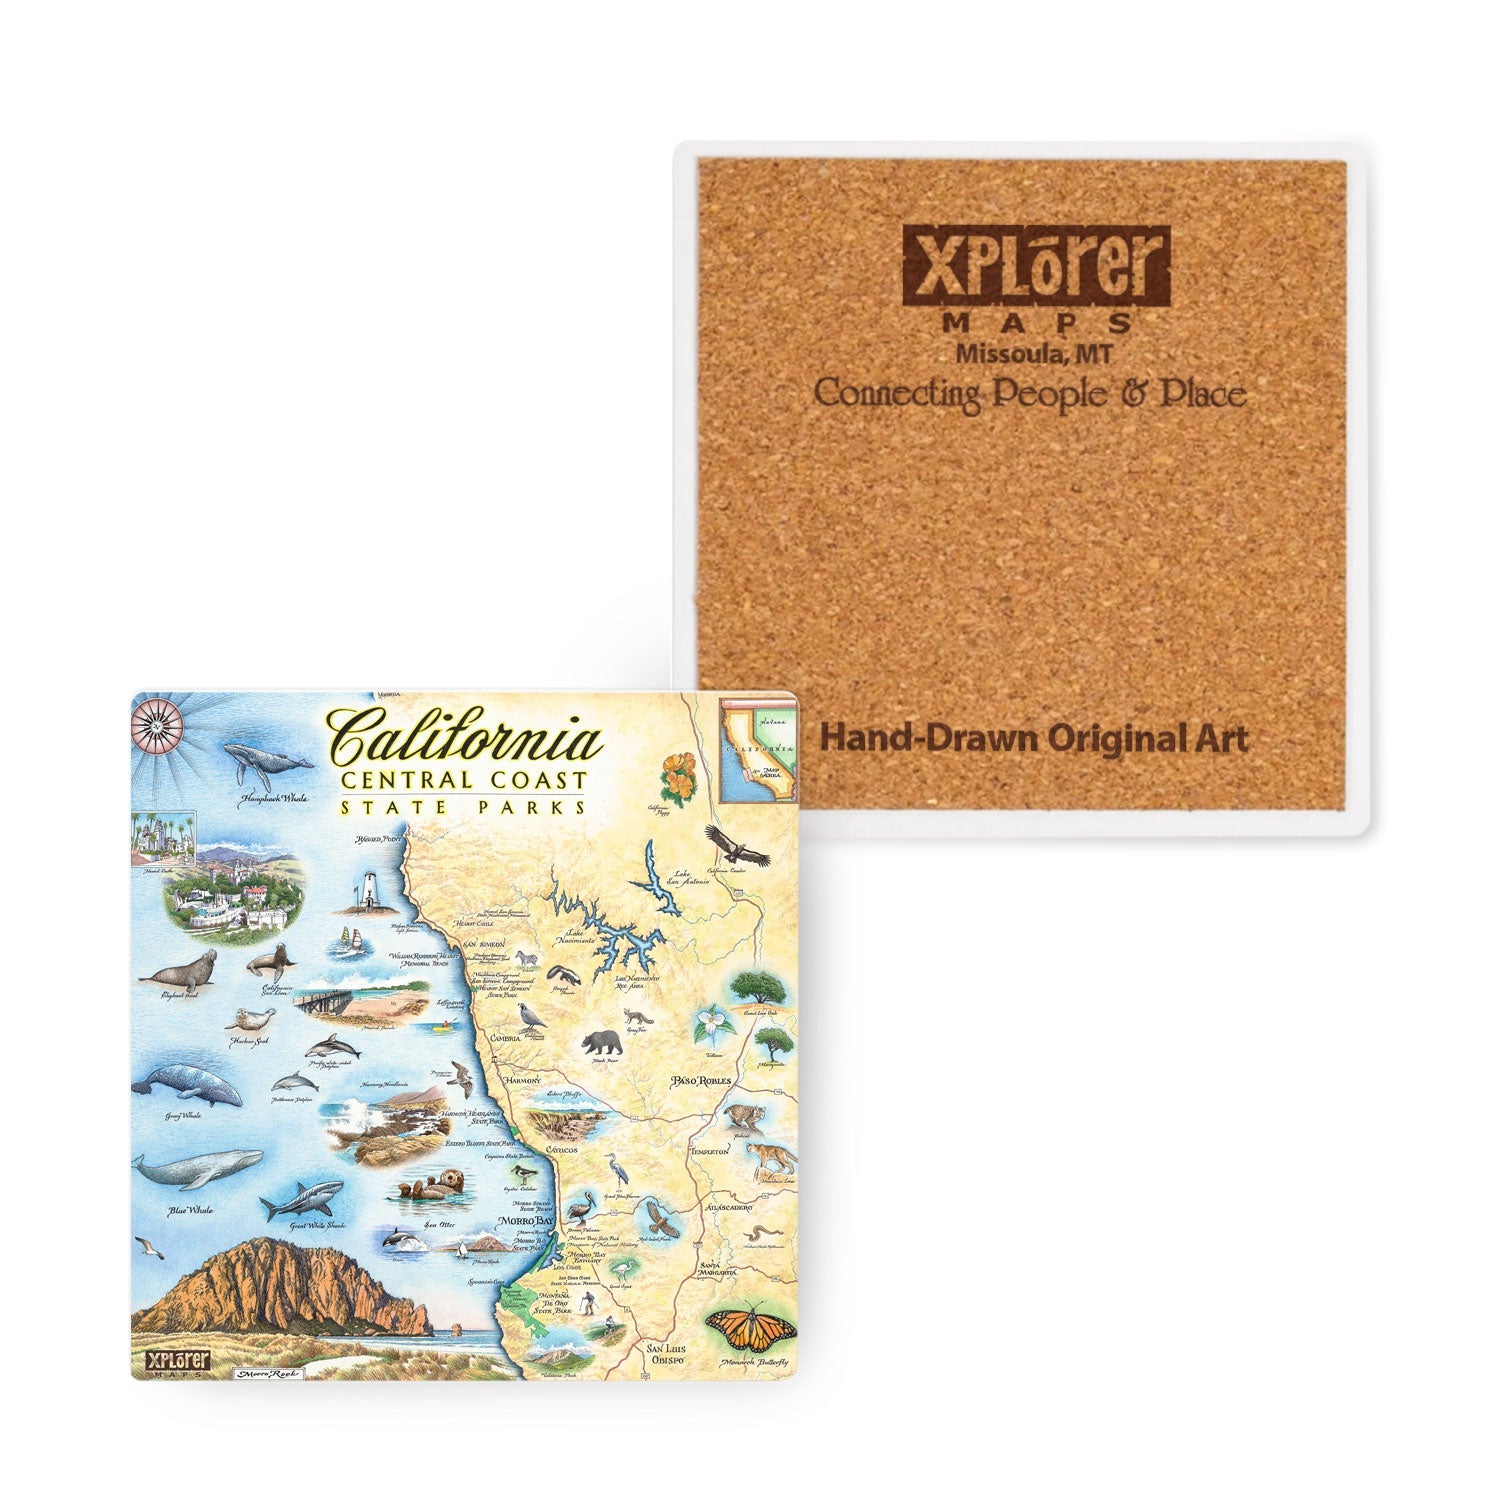 California Central Coast State Map Ceramic coaster in earth tones. Wildlife viewing is abundant with sea life, birding, and terrestrial creatures. Cultural history is rich in the area with the fame of Hearst Castle, Ranchers of Montana De Oro, Dunites of Oceano Dunes, and Native people that have lived on this land for thousands of years from San Francisco to Los Angeles. See butterflies, bears, seals, otters, whales and more! 